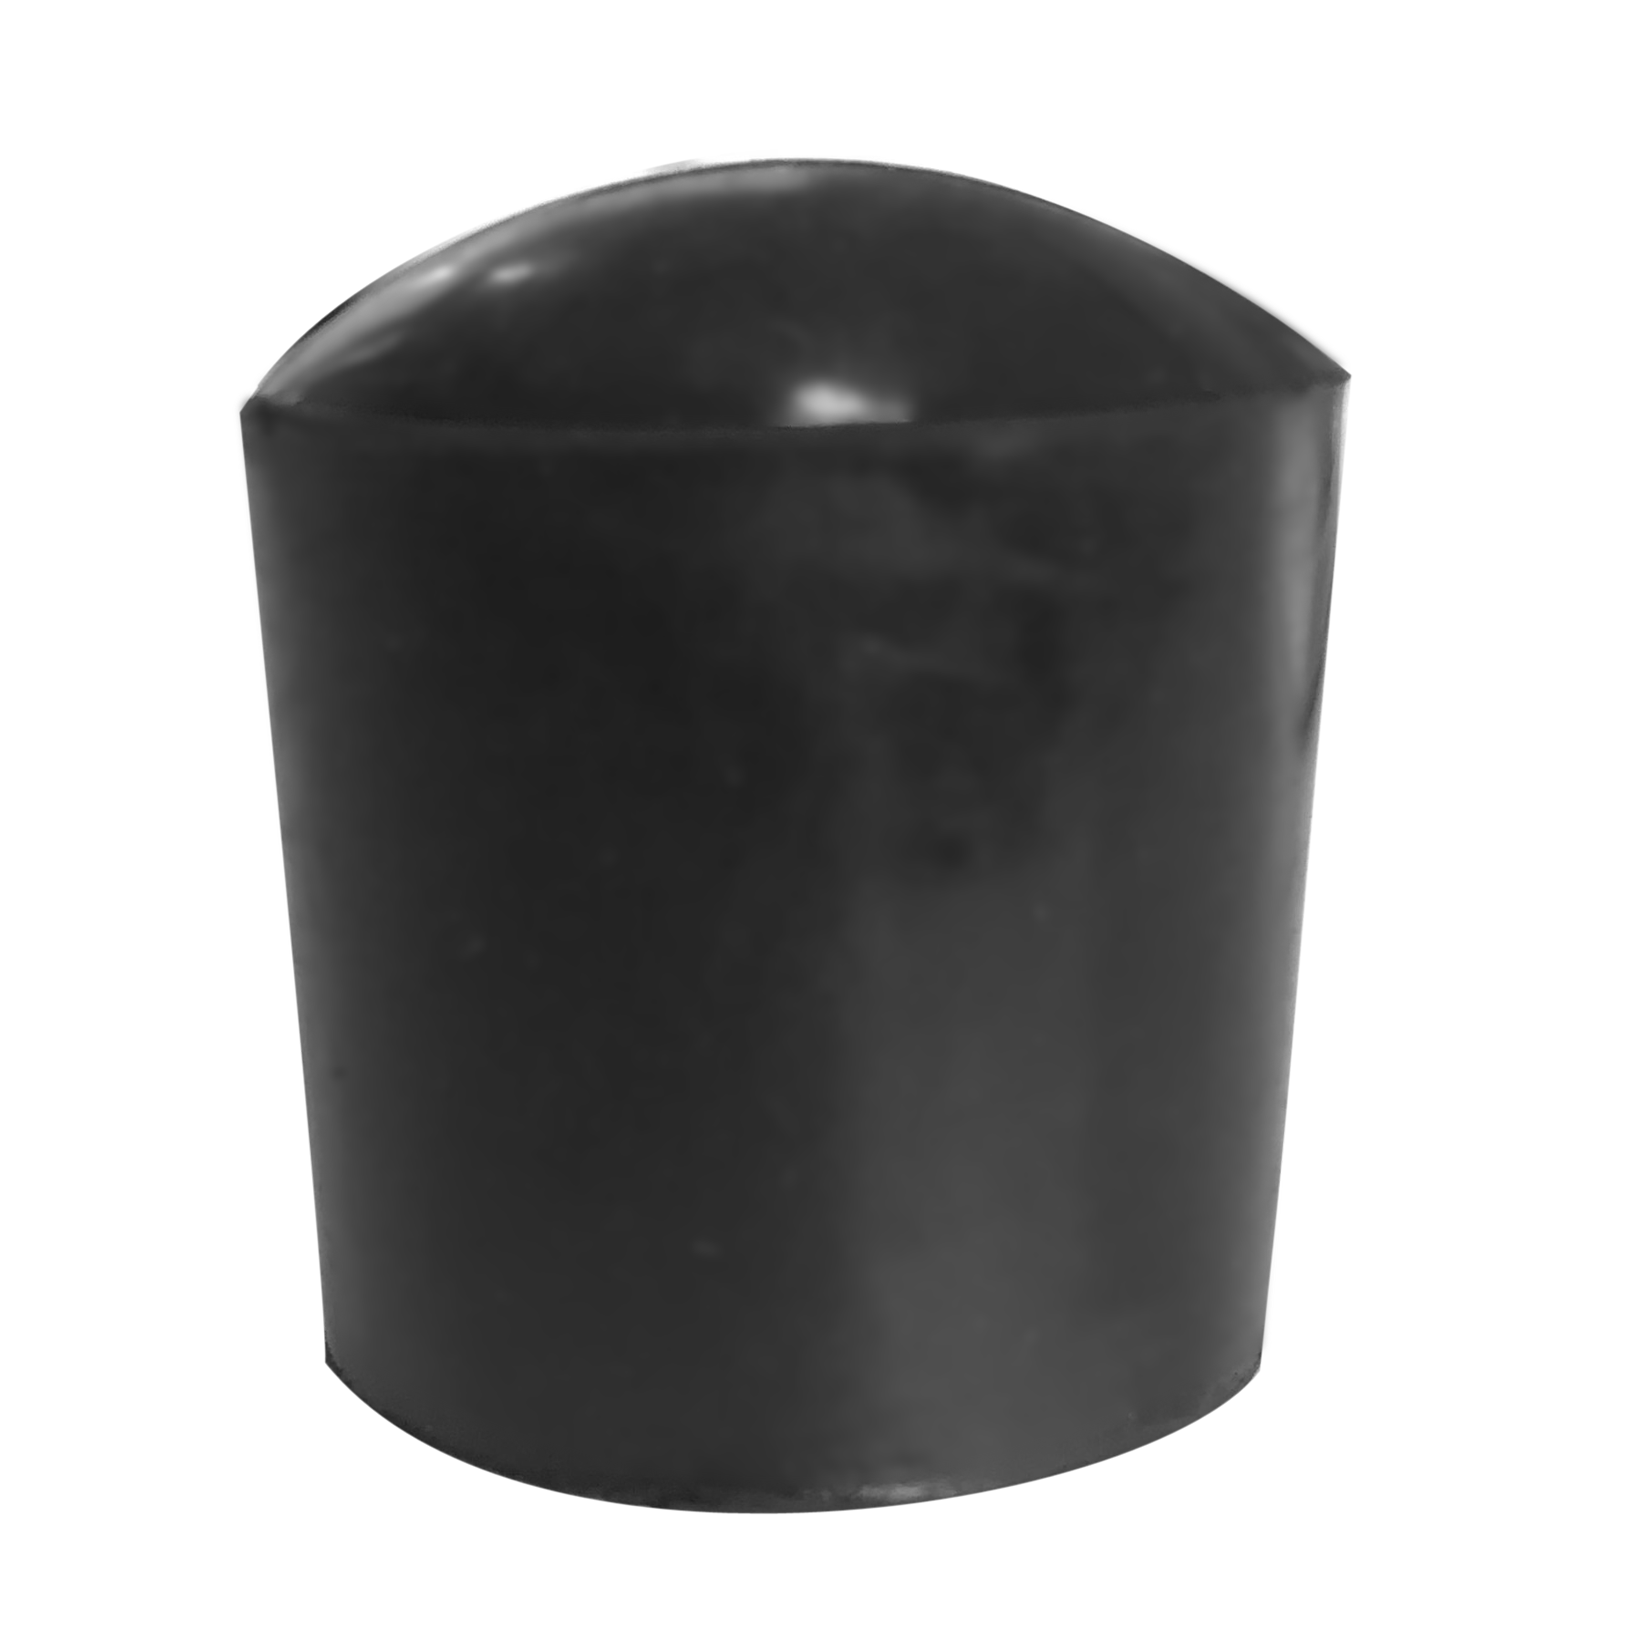 Rubber Seat Cane Tips (Black) by The Cane Collective